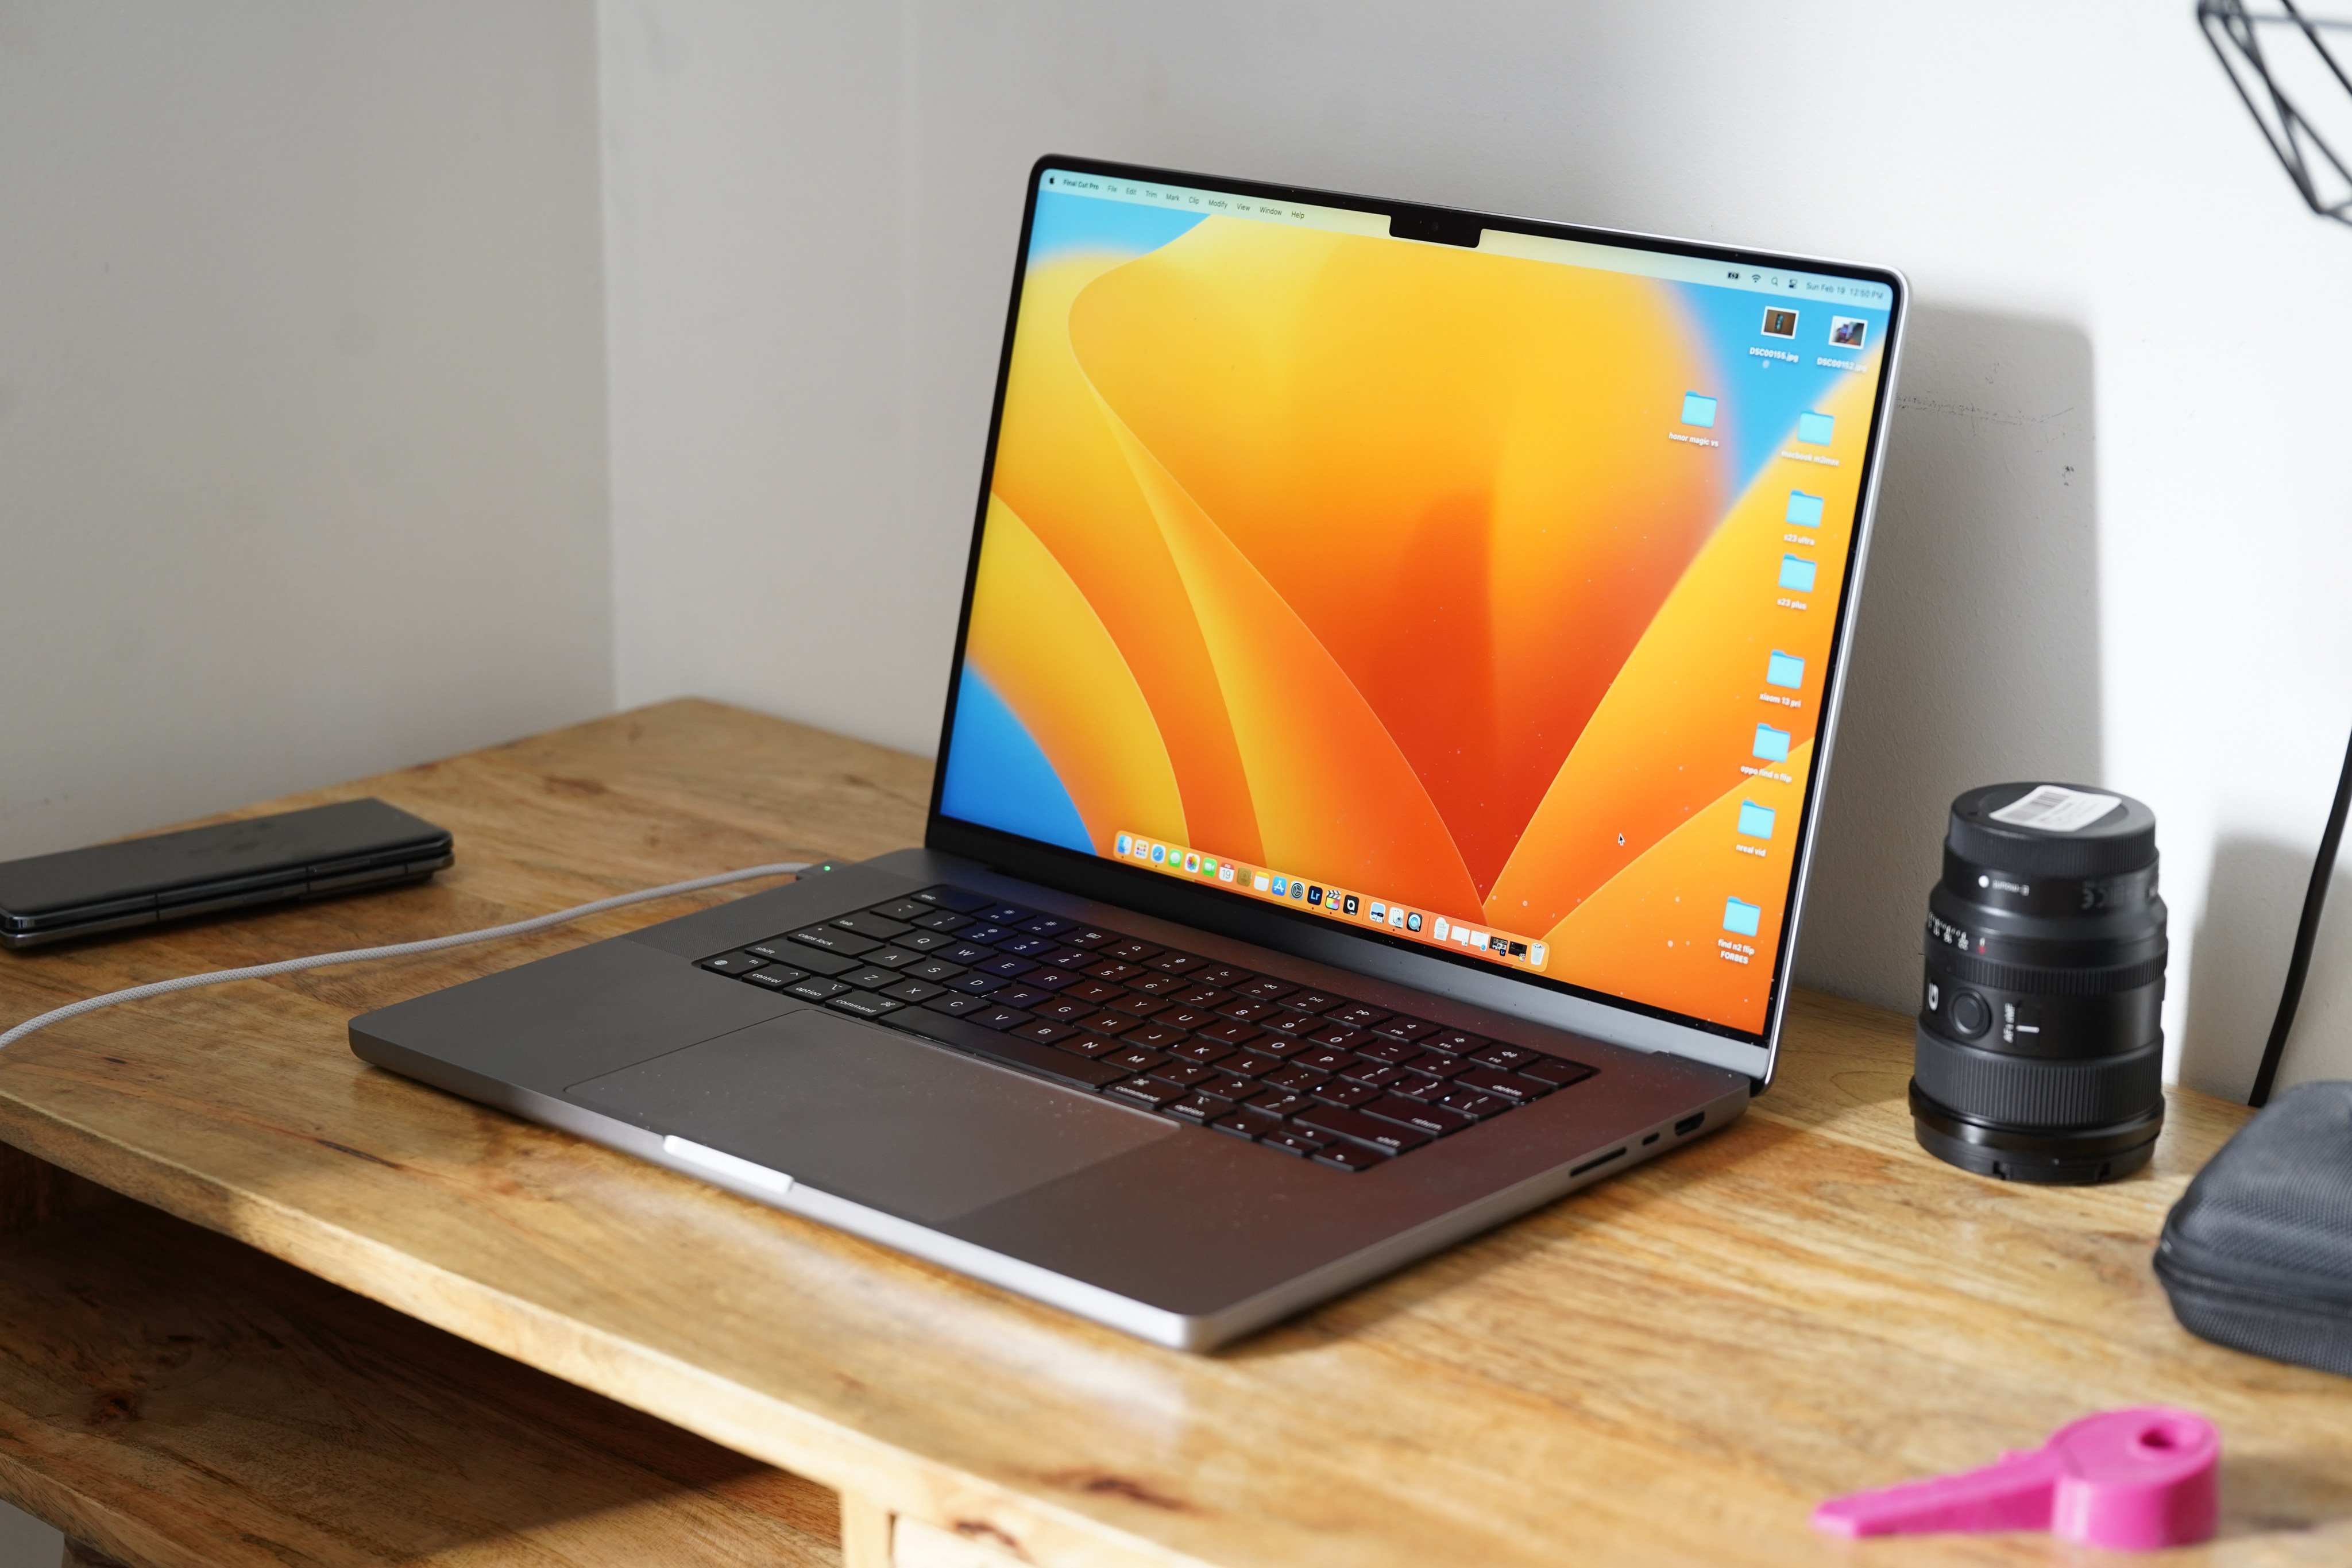 MacBook Pro M2 Max (2023) review: Even more power